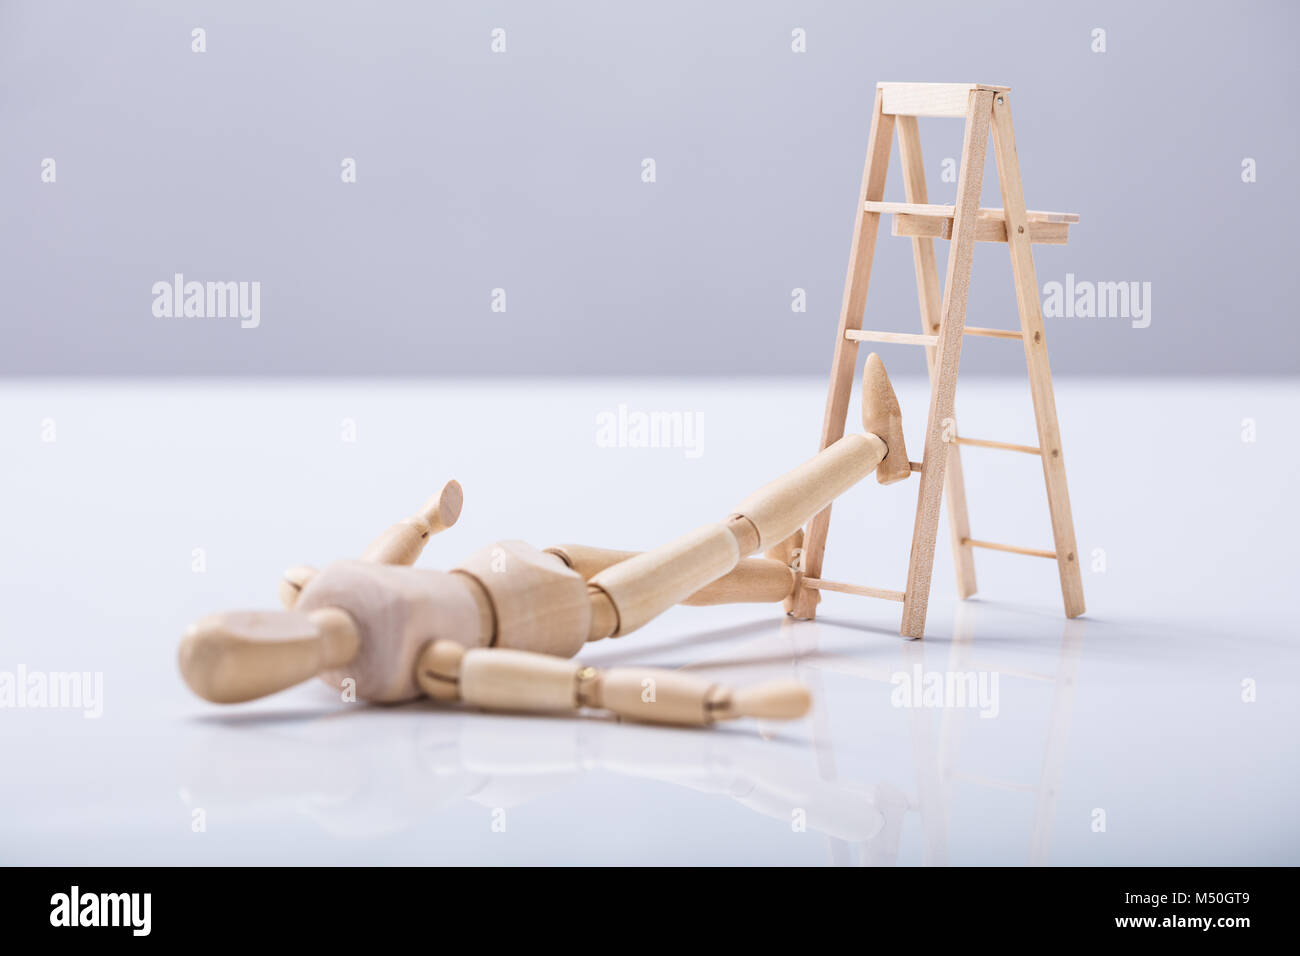 Wooden Figure Lying On Floor After Falling From Ladder Stock Photo